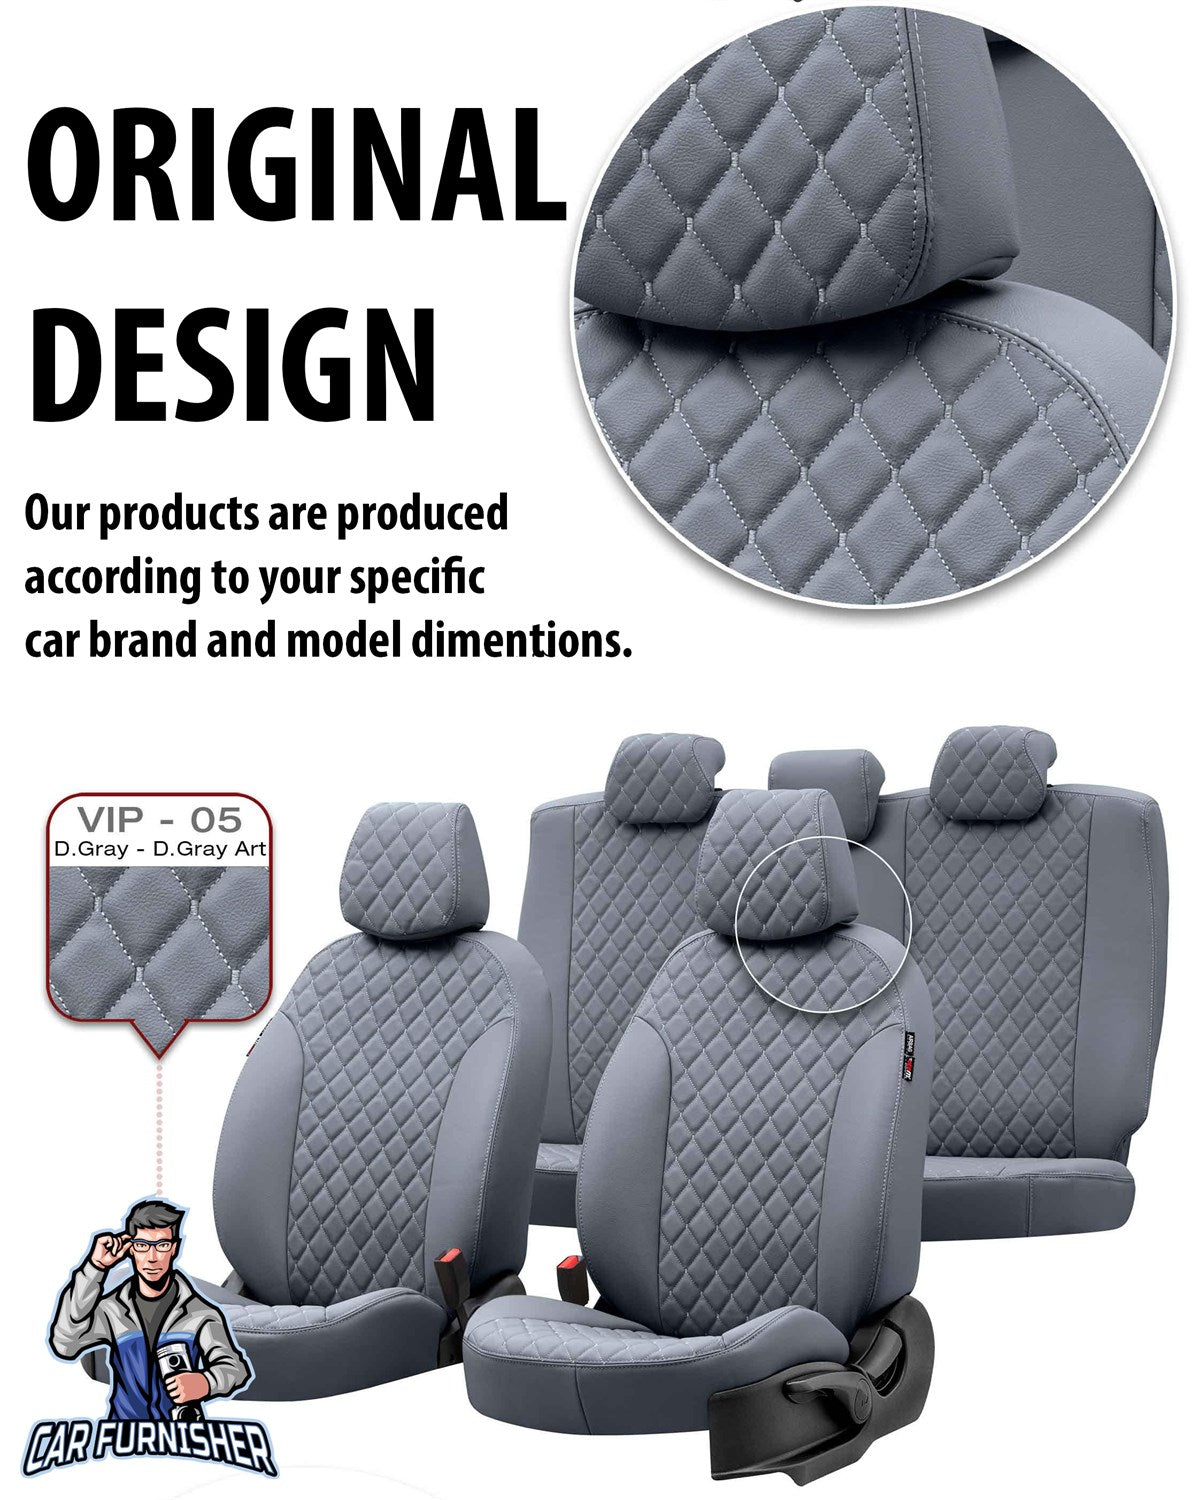 Fiat Panda Seat Covers Madrid Leather Design Beige Leather